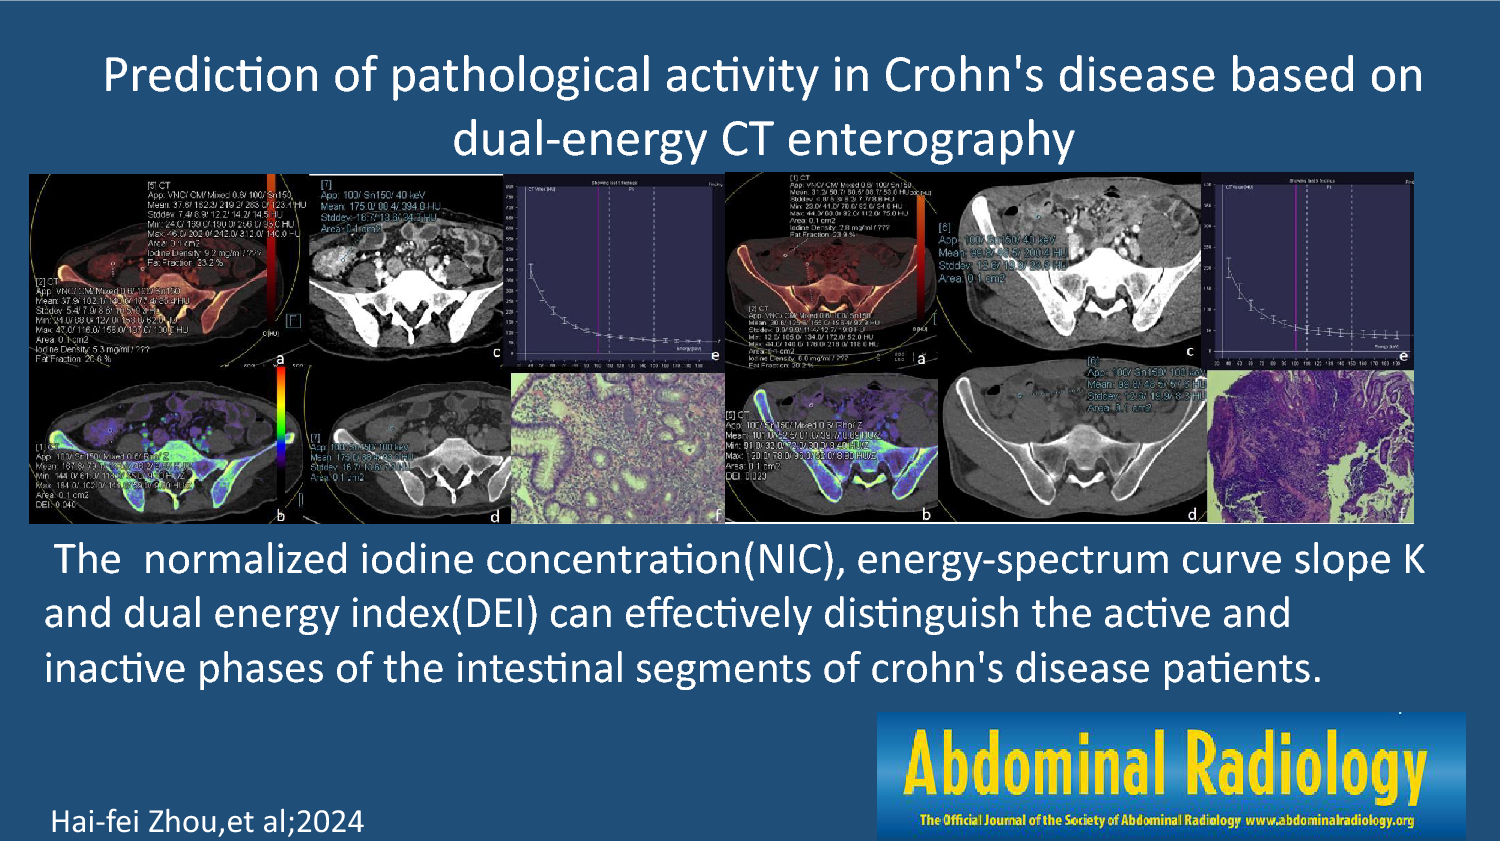 Prediction of pathological activity in Crohn’s disease based on dual-energy CT enterography